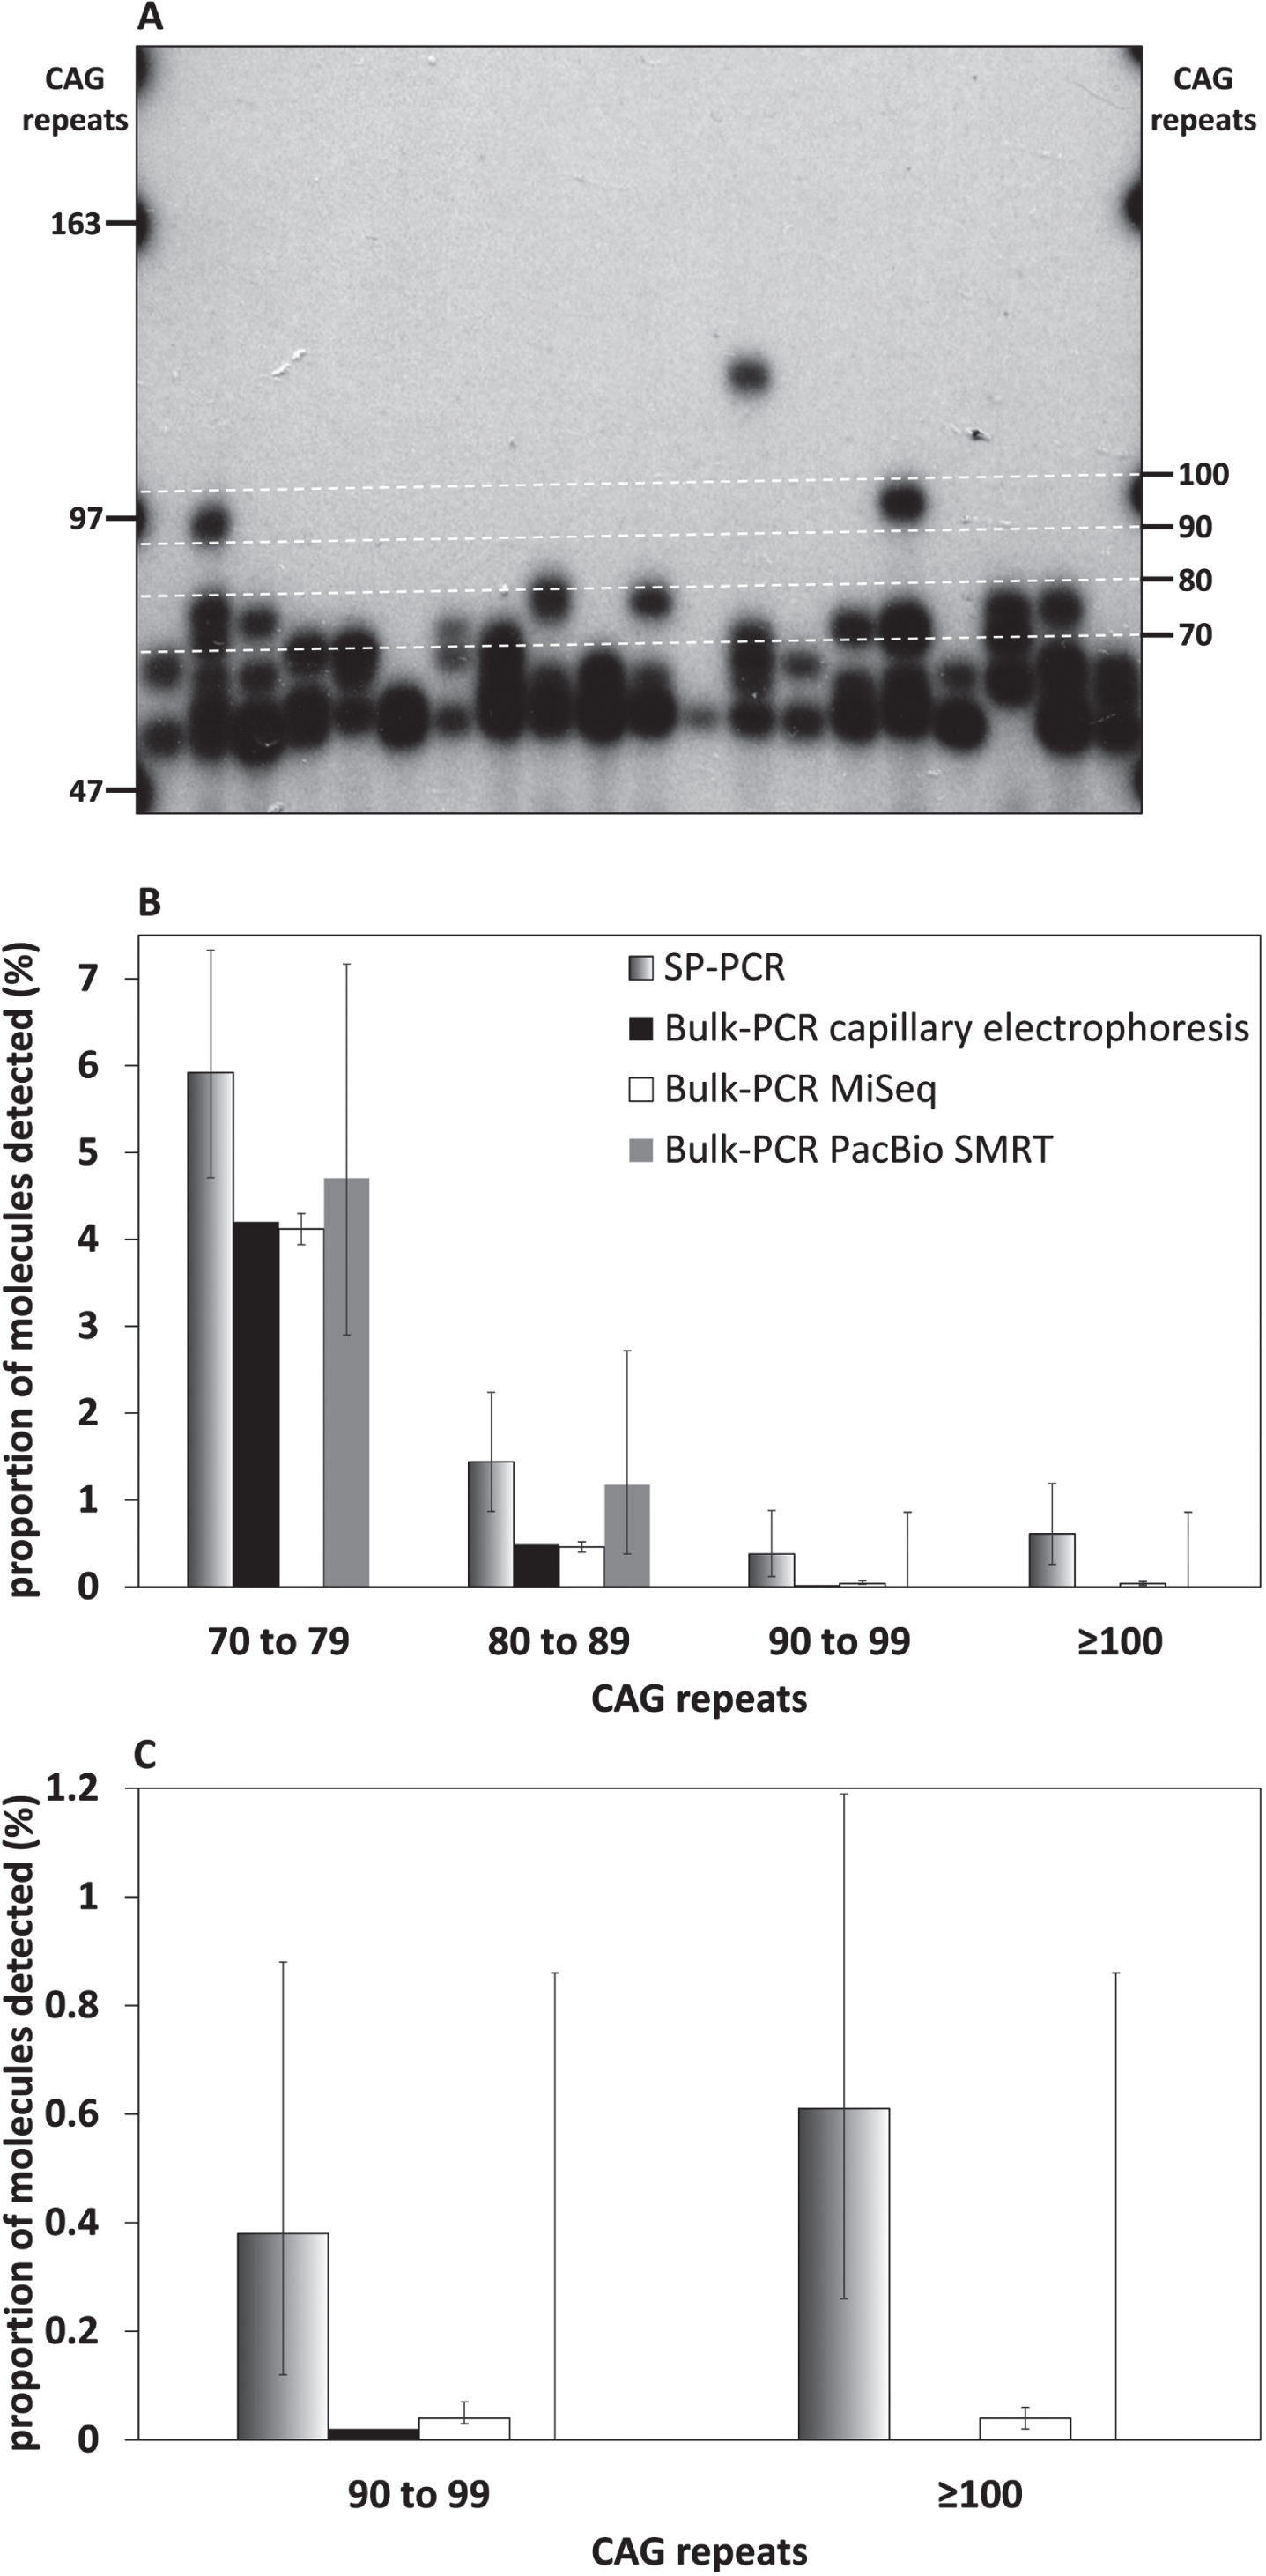 SP-PCR can detect very large HTT CAG somatic expansions (≥90 CAGs) that cannot be detected using bulk-PCR approaches. A) Representative small pool PCR autoradiograph from 150 pg template DNA obtained for the striatum of the 117-week-old R6/2 mouse with ∼55 CAGs. The number of CAG repeats, equivalent to each molecular weight marker (left) and the boundaries of the categories represented in panel A (right), is indicated. The boundaries of the categories represented in panel A (right) are also indicated by white dashed lines. B) Percentage of large (≥70 CAGs) HTT CAG somatic expansions detected by SP-PCR (black to white gradient), or bulk-PCR capillary electrophoresis (black), bulk-PCR MiSeq (white), bulk-PCR PacBio SMRT (grey) in the striatum of the 117-week-old R6/2 mouse with progenitor allele ∼55 CAGs. C: HTT CAG somatic expansions >90 CAGs from panel B. Error bars indicate the 95% confidence intervals (they could not be estimated for the bulk-PCR capillary electrophoresis because the fluorescence units measured cannot be transformed into a count of PCR products detected).